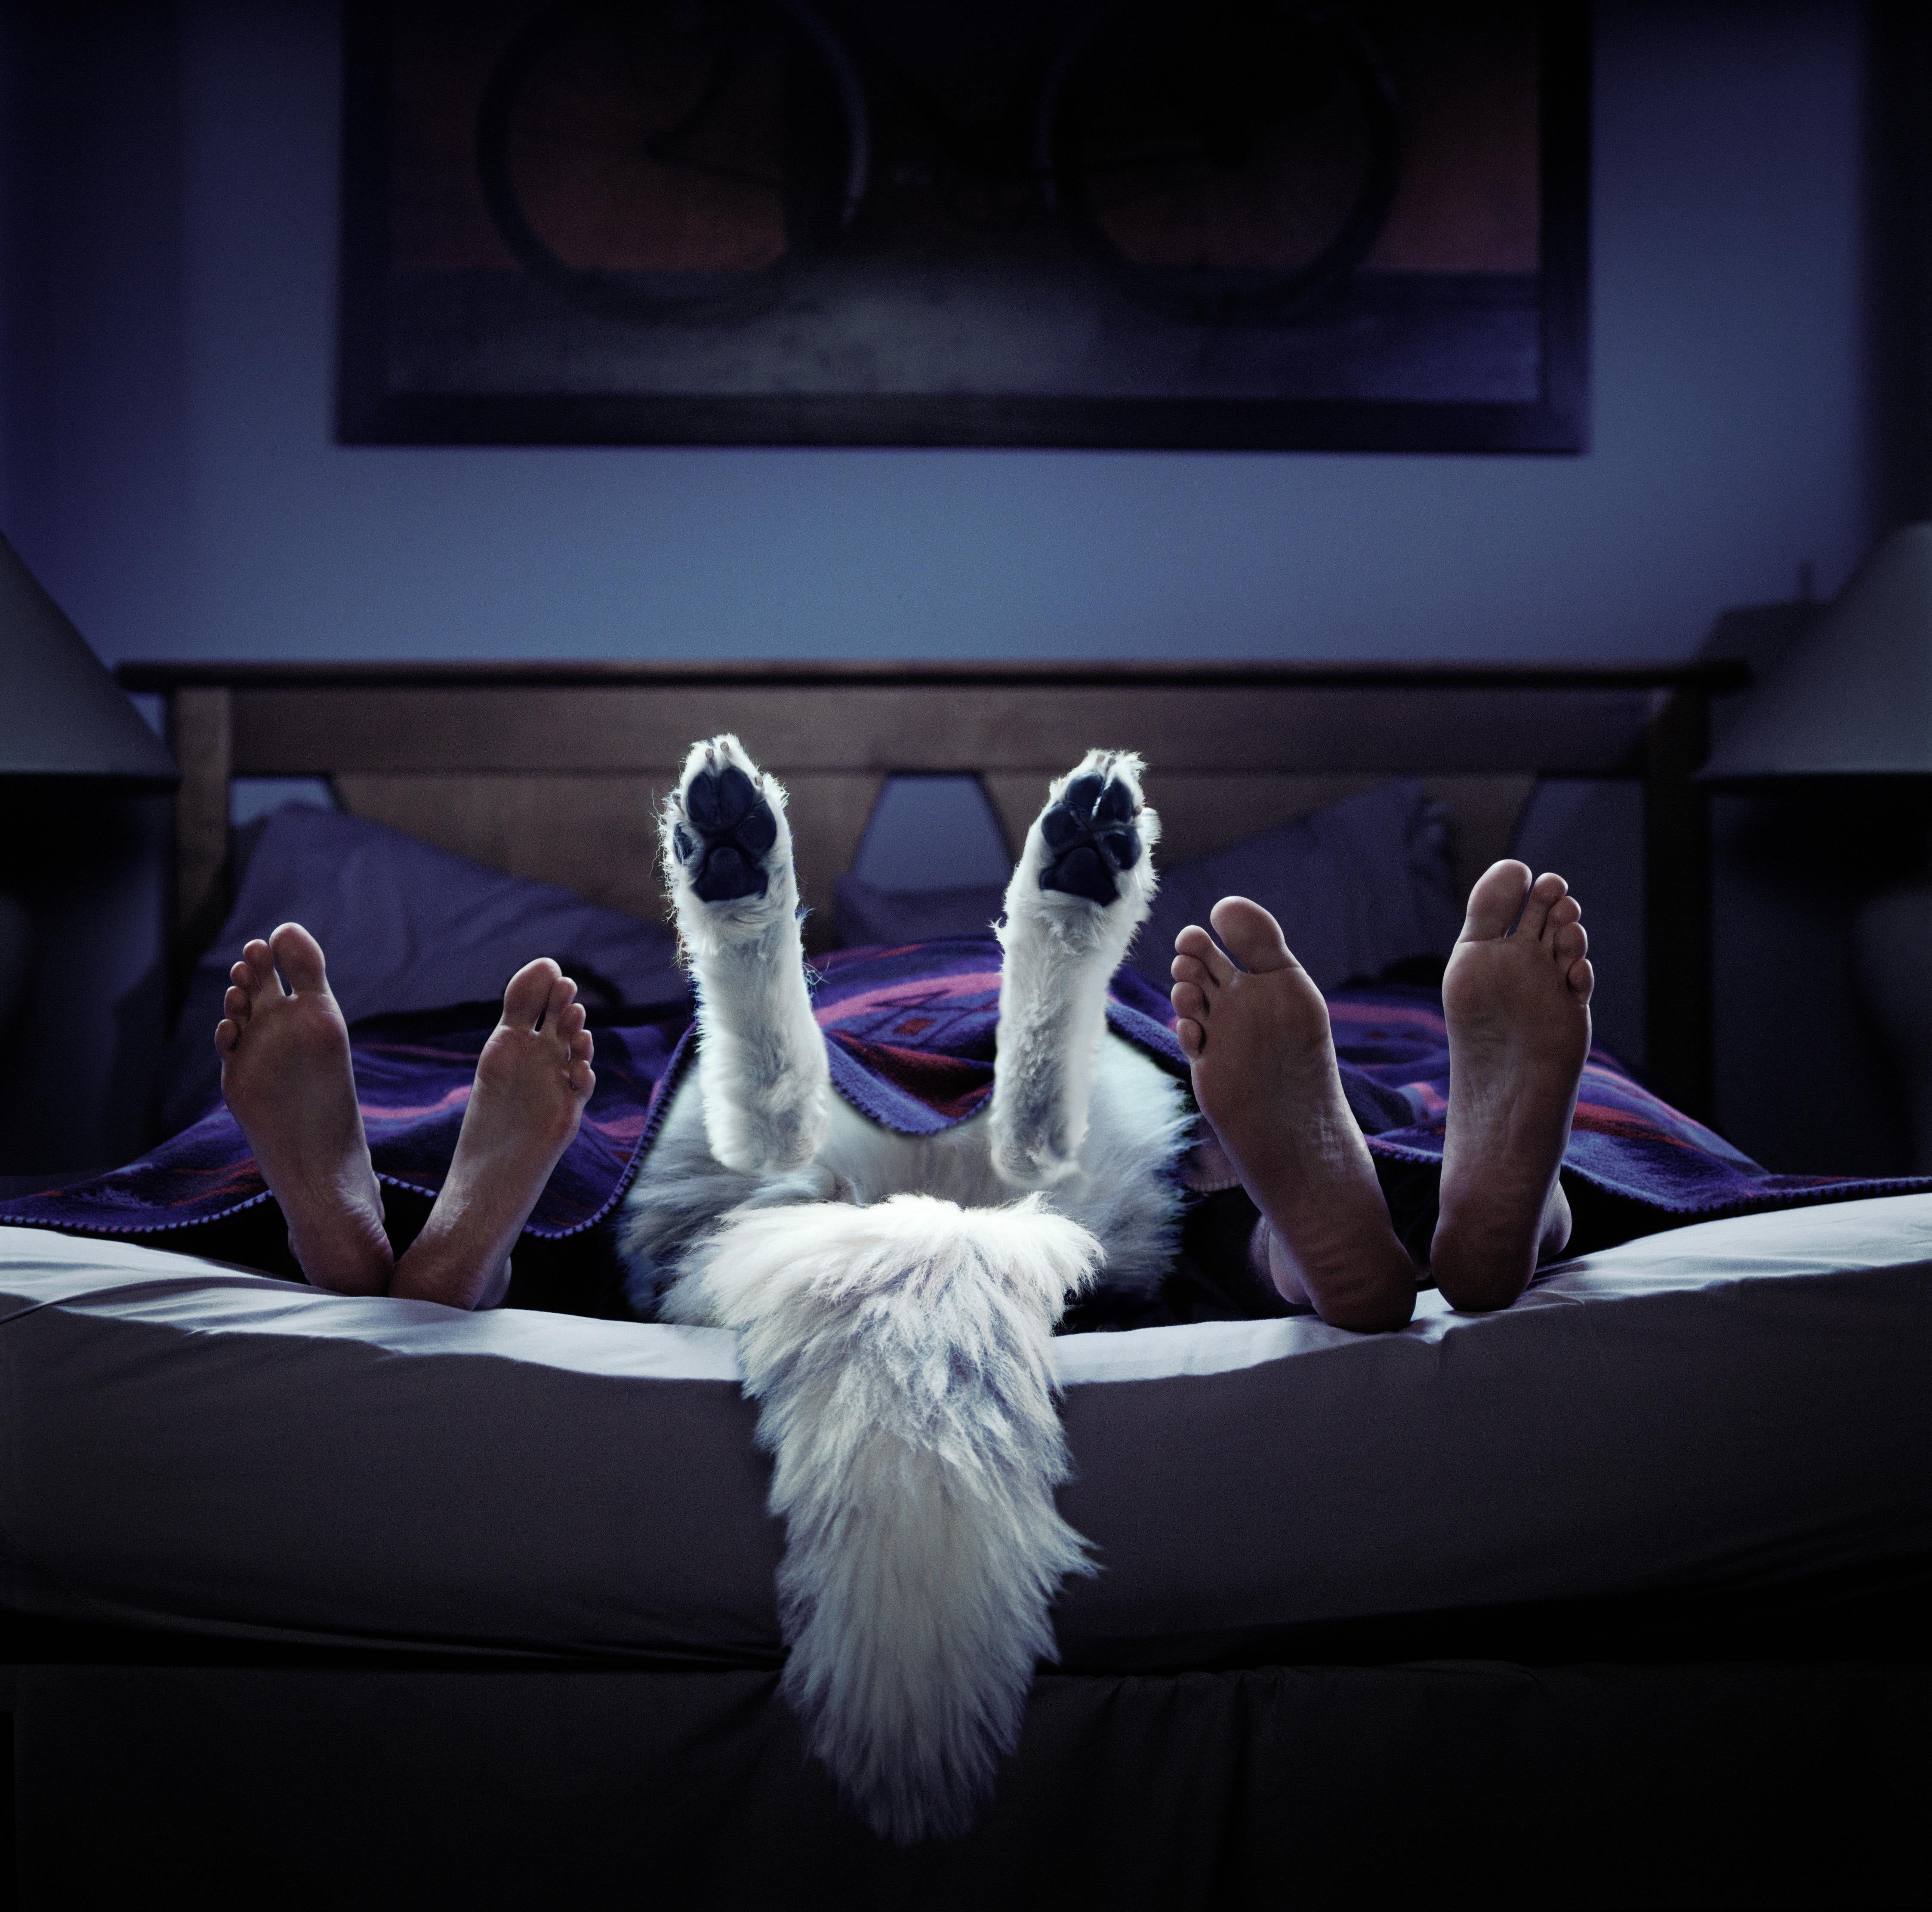 Dog in Bed - Photograph by Nick Vedros